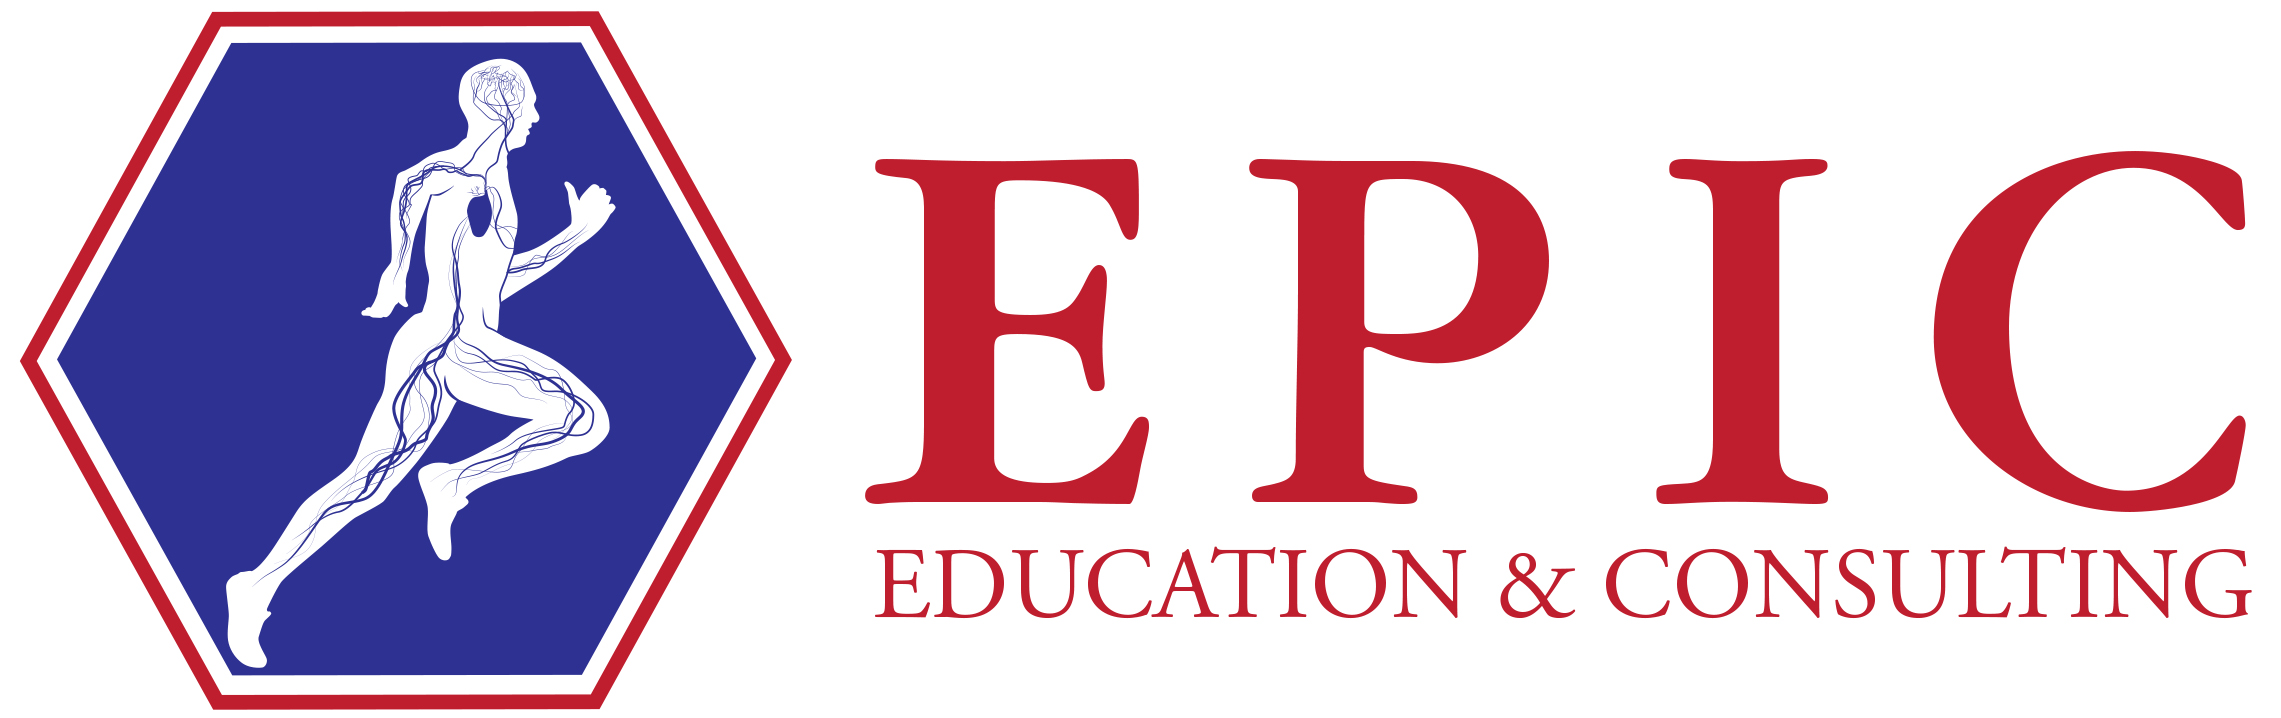 EPIC Education and Consulting